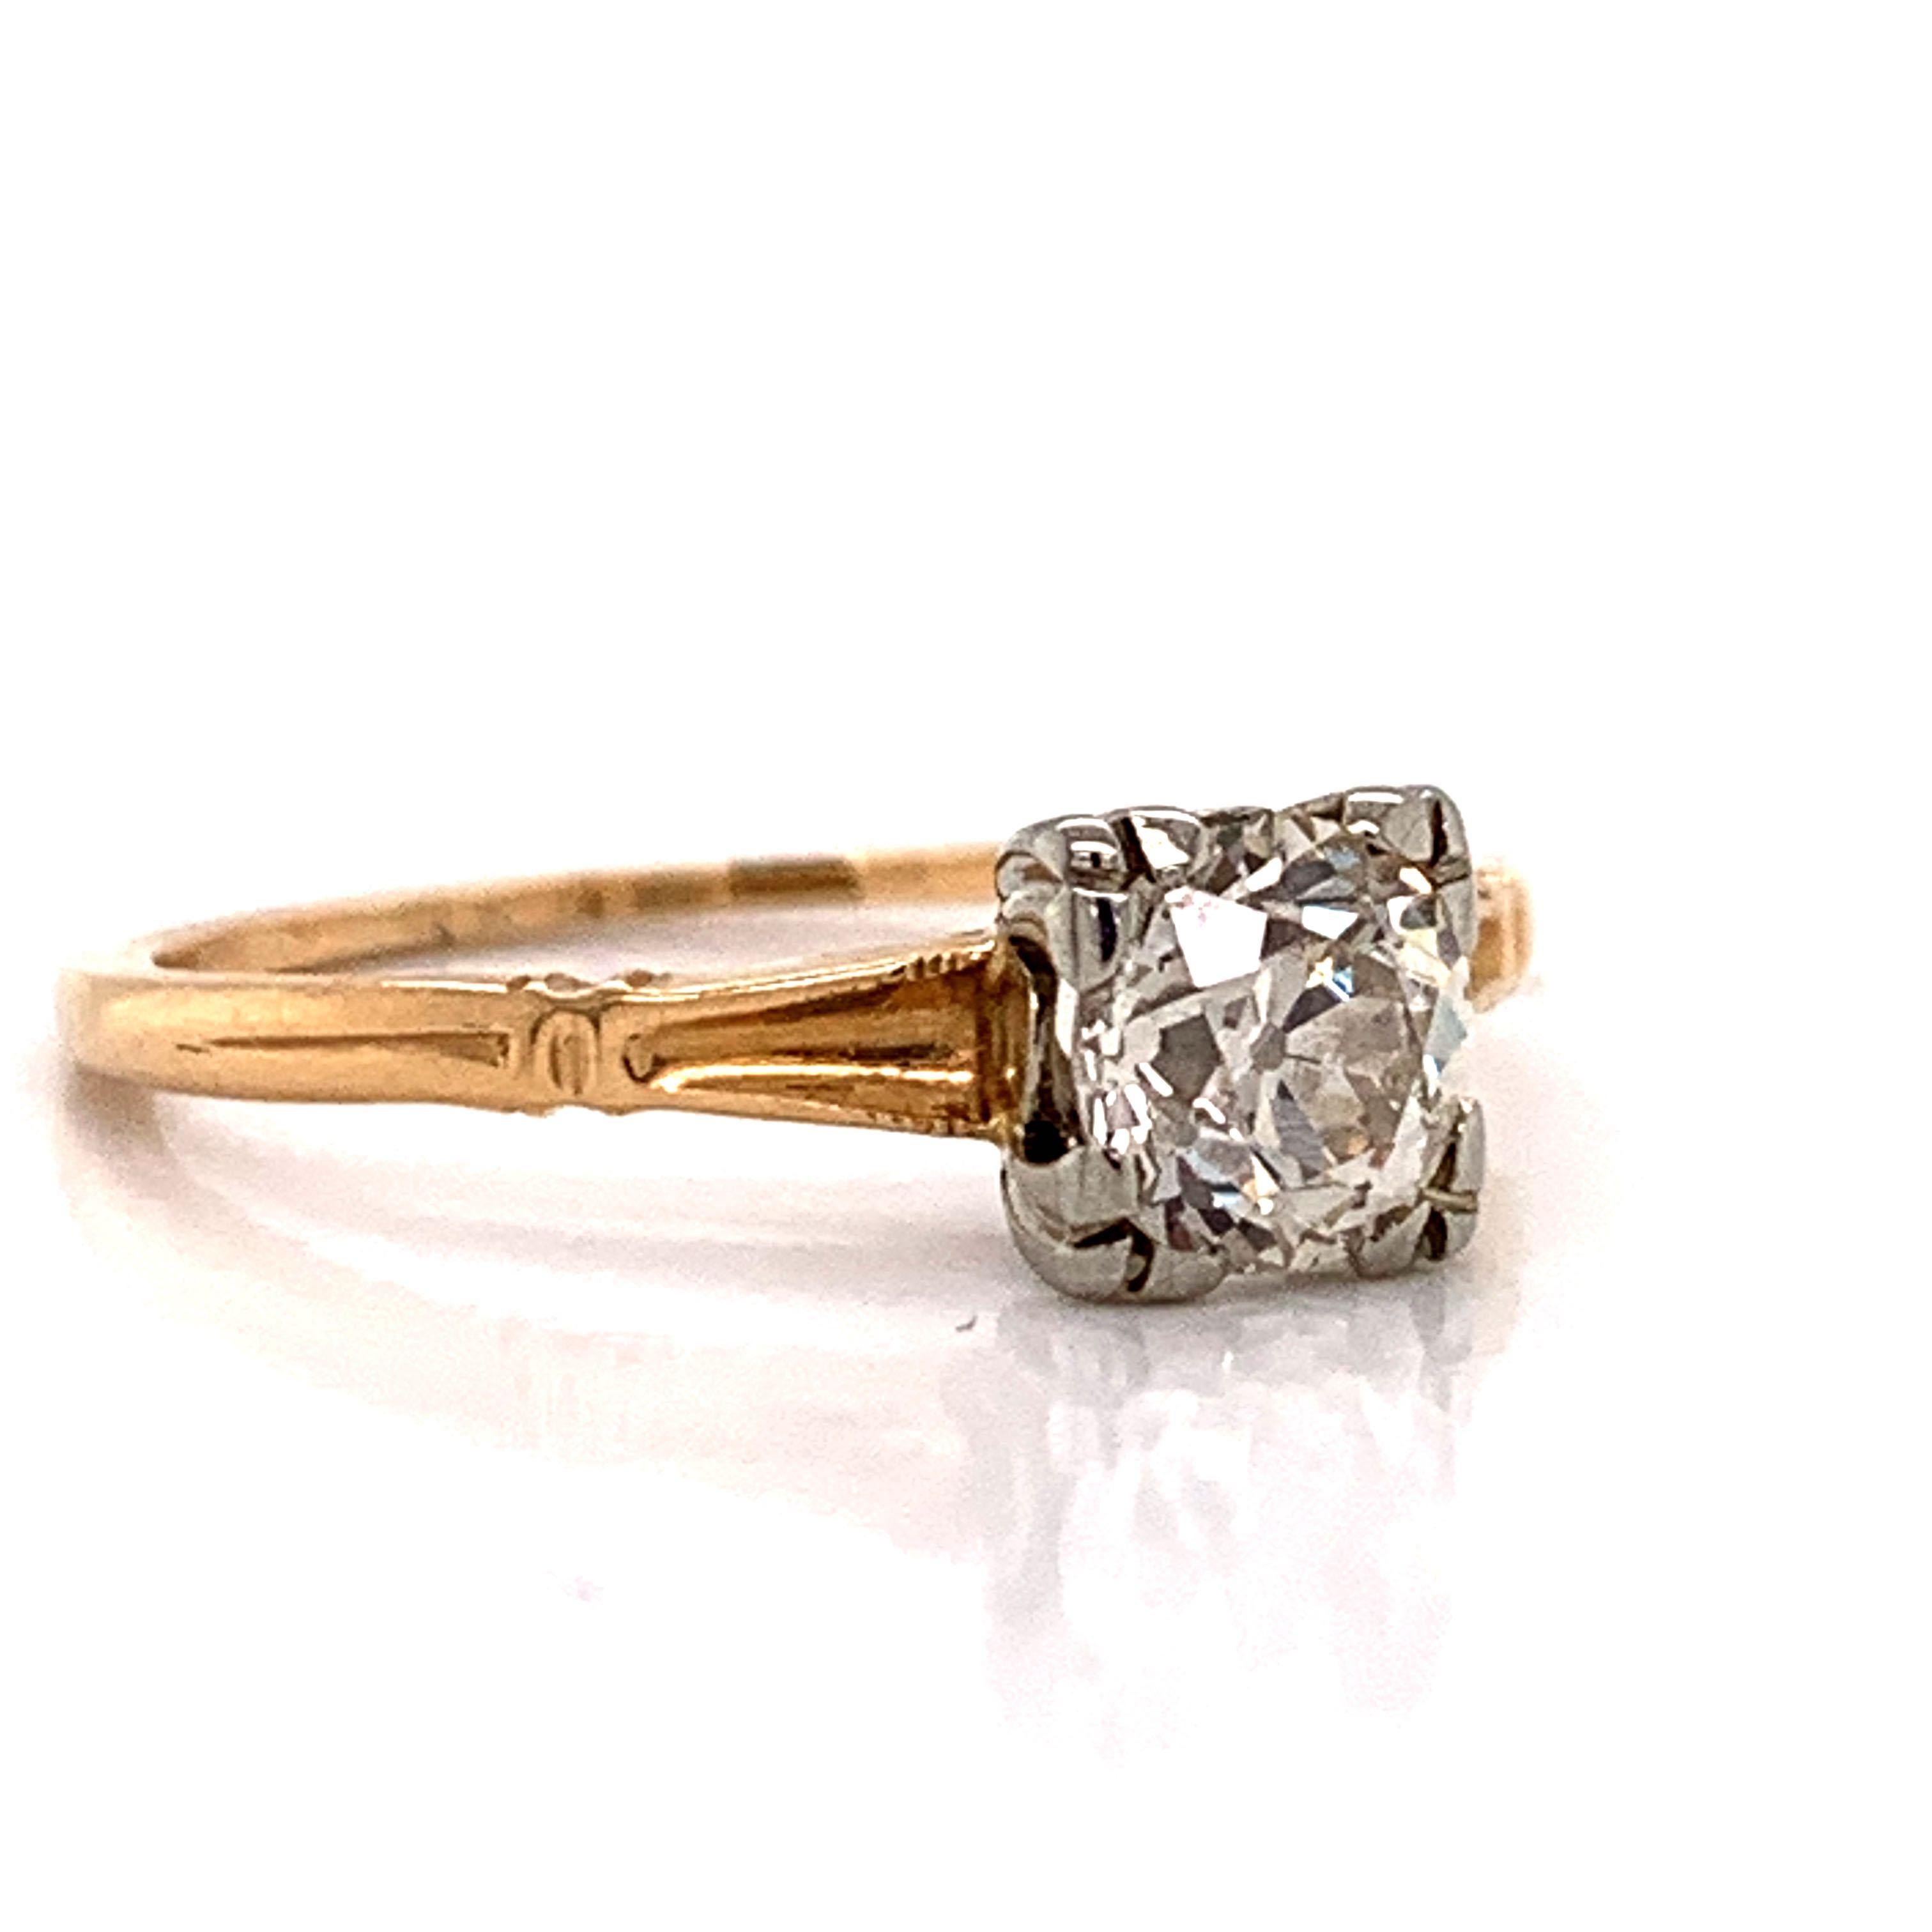 14k Yellow Gold .53ct Vintage Art Deco European Cut Diamond Engagement Size 5.5

Condition:  Excellent Condition, Professionally Cleaned and Polished
Metal:  14k Gold (Marked, and Professionally Tested)
Weight:  1.6ct
Diamond:  .56ct Old European